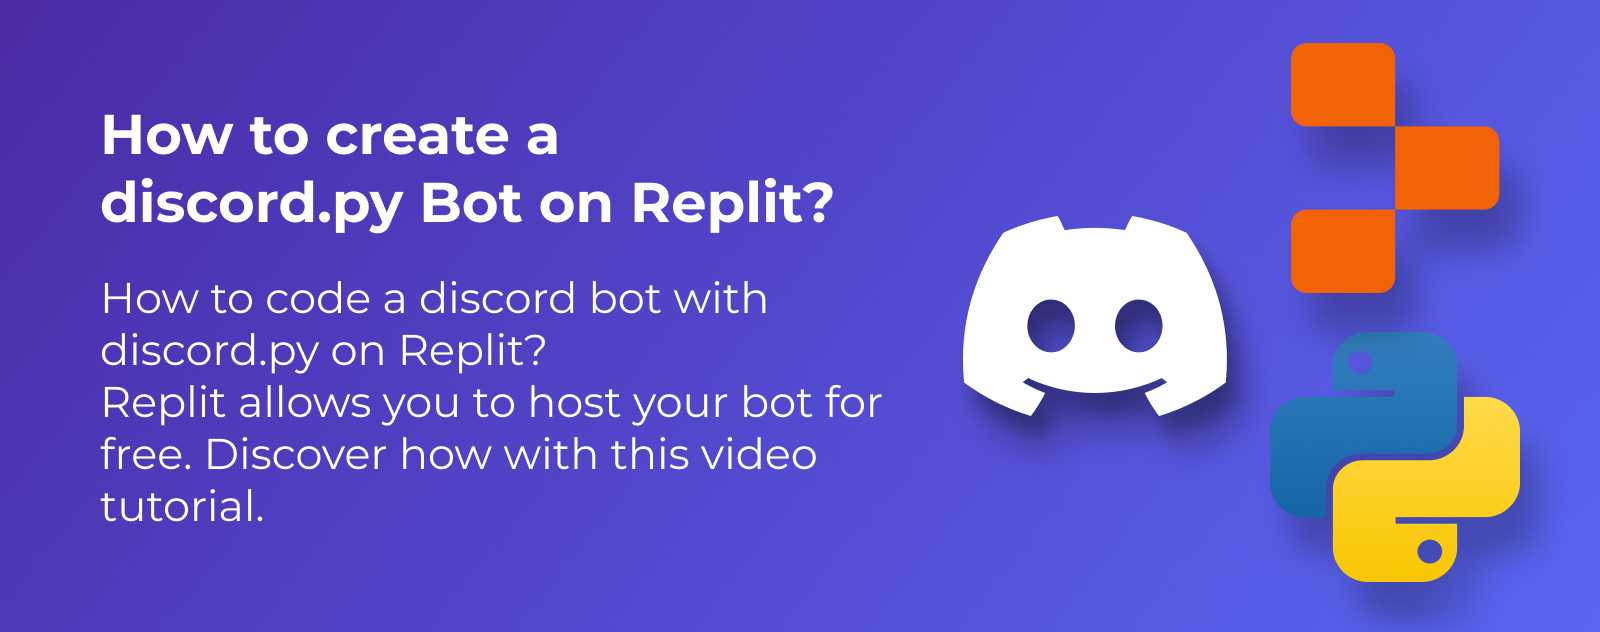 How to create a discord.py Bot on Replit?